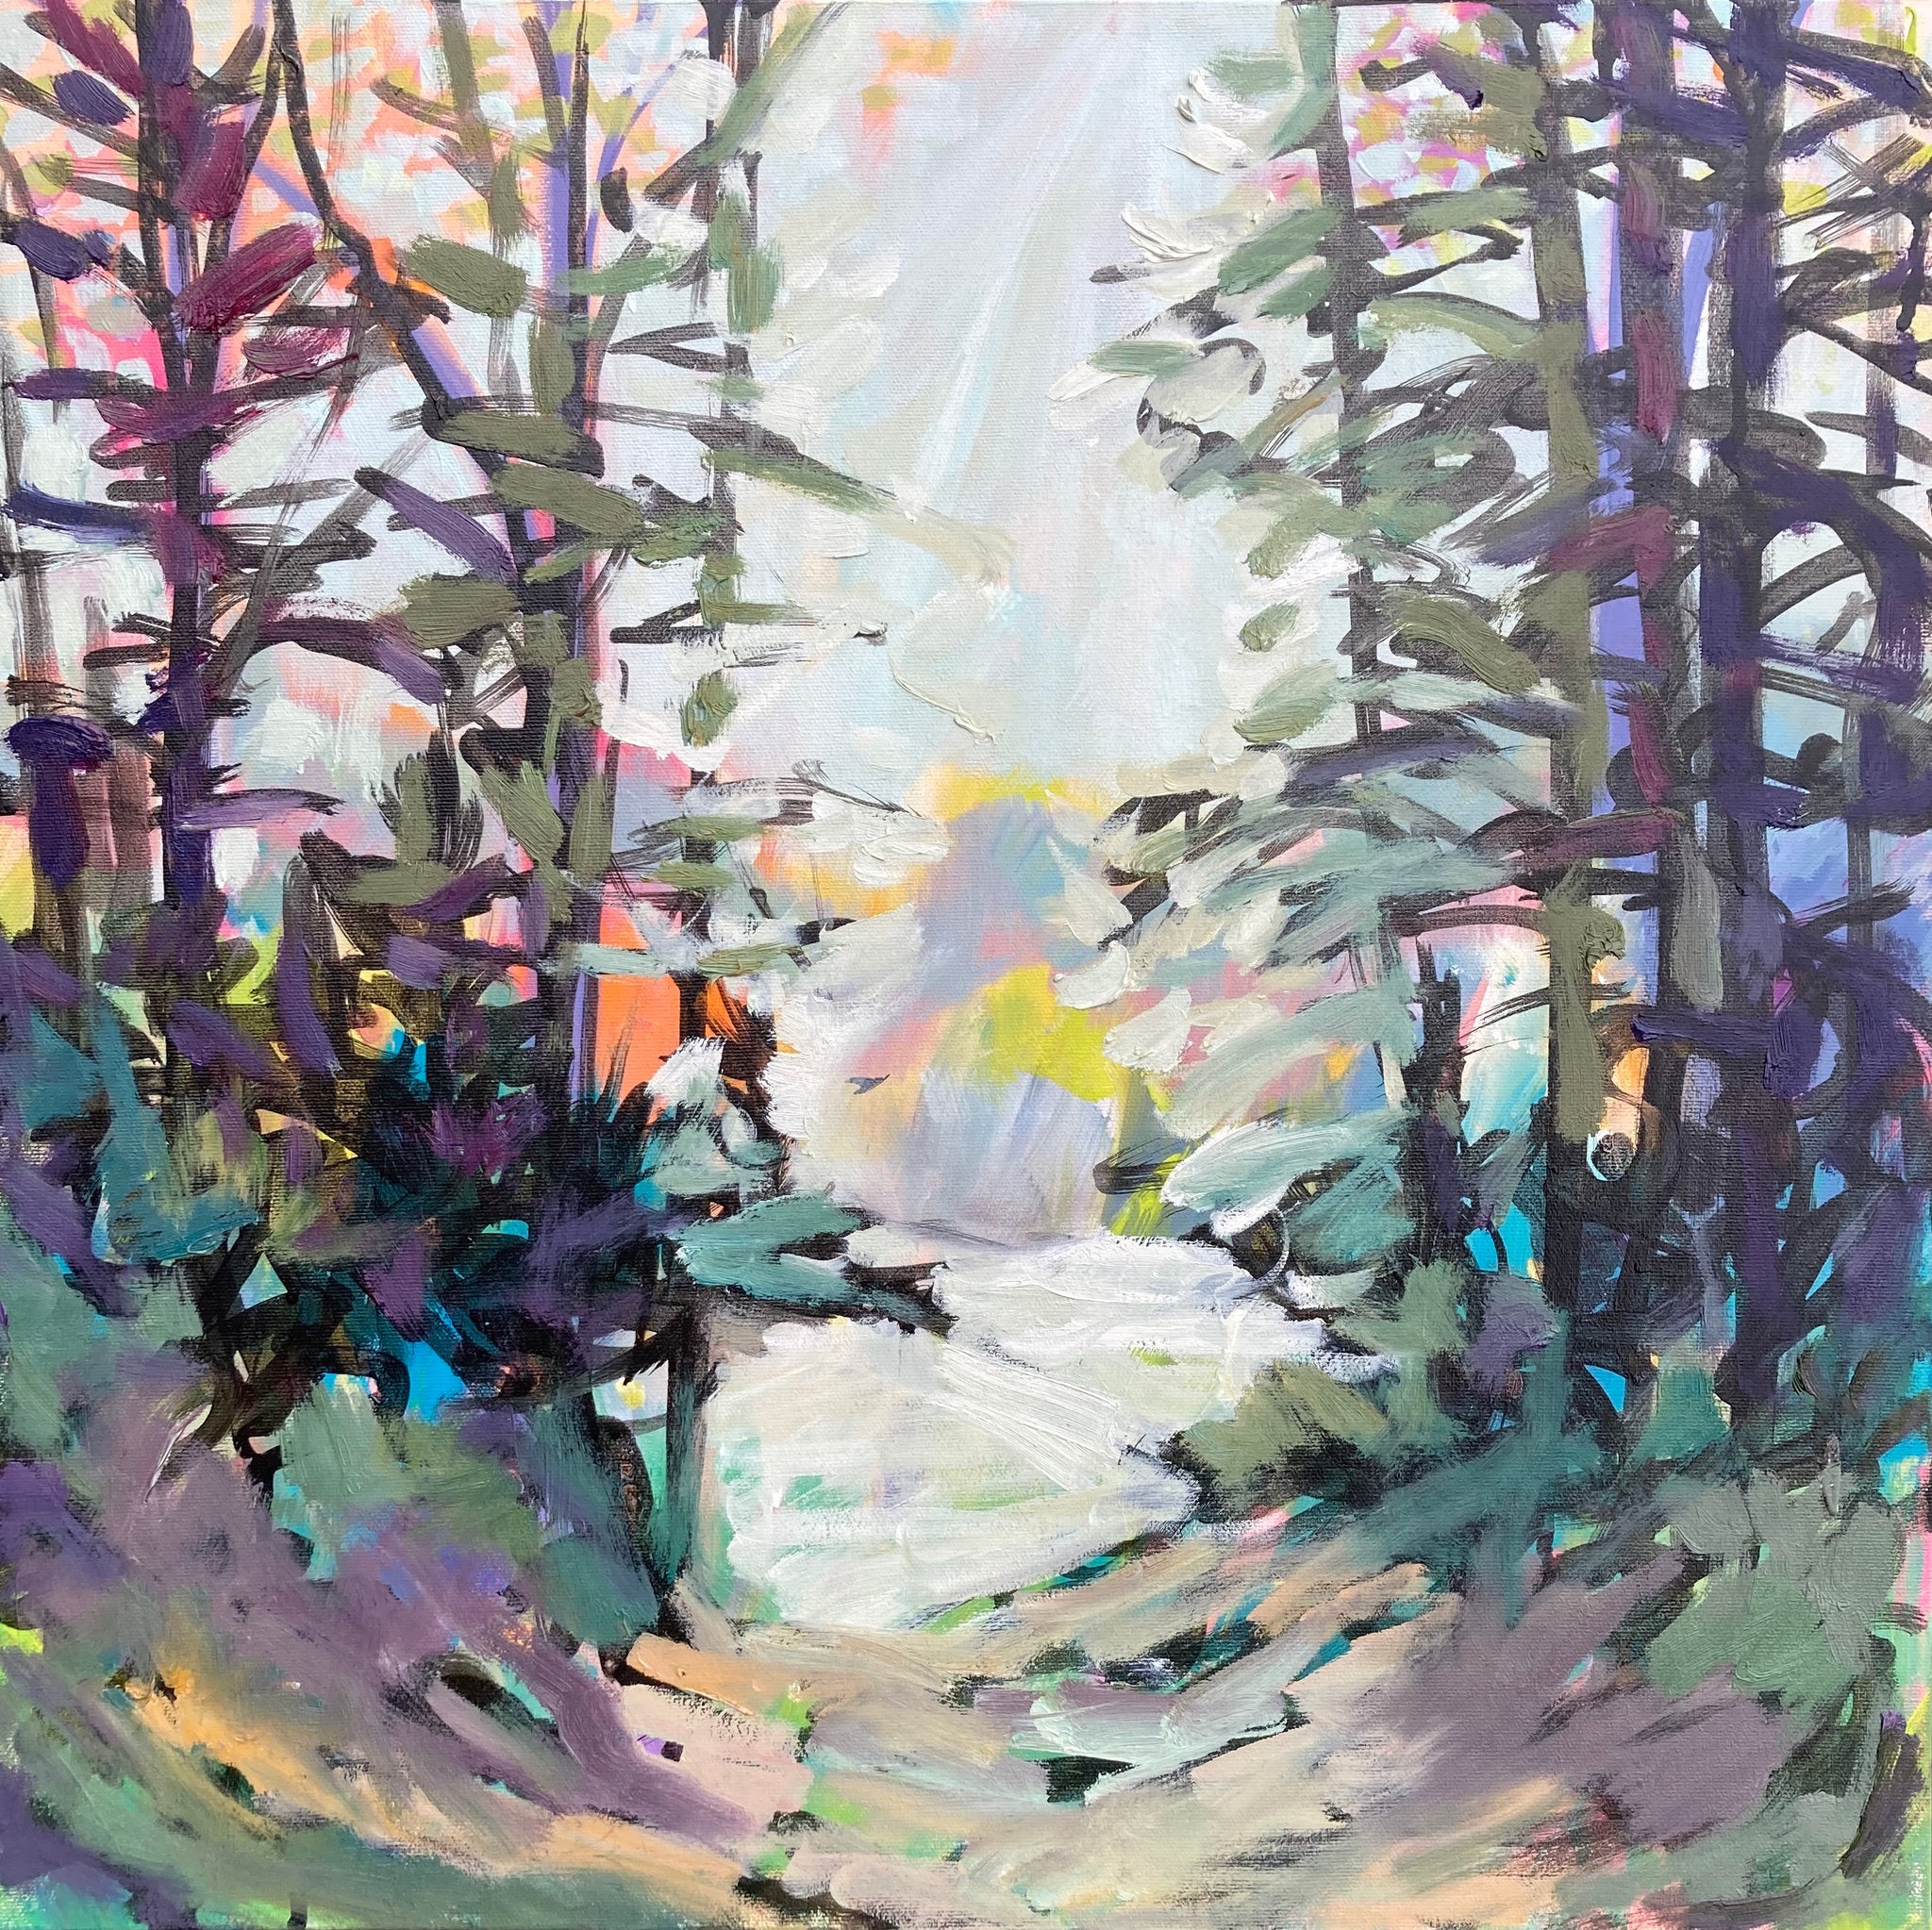 Algonquin Spirit is an original oil painting. The view is through the trees in this earthy landscape original.